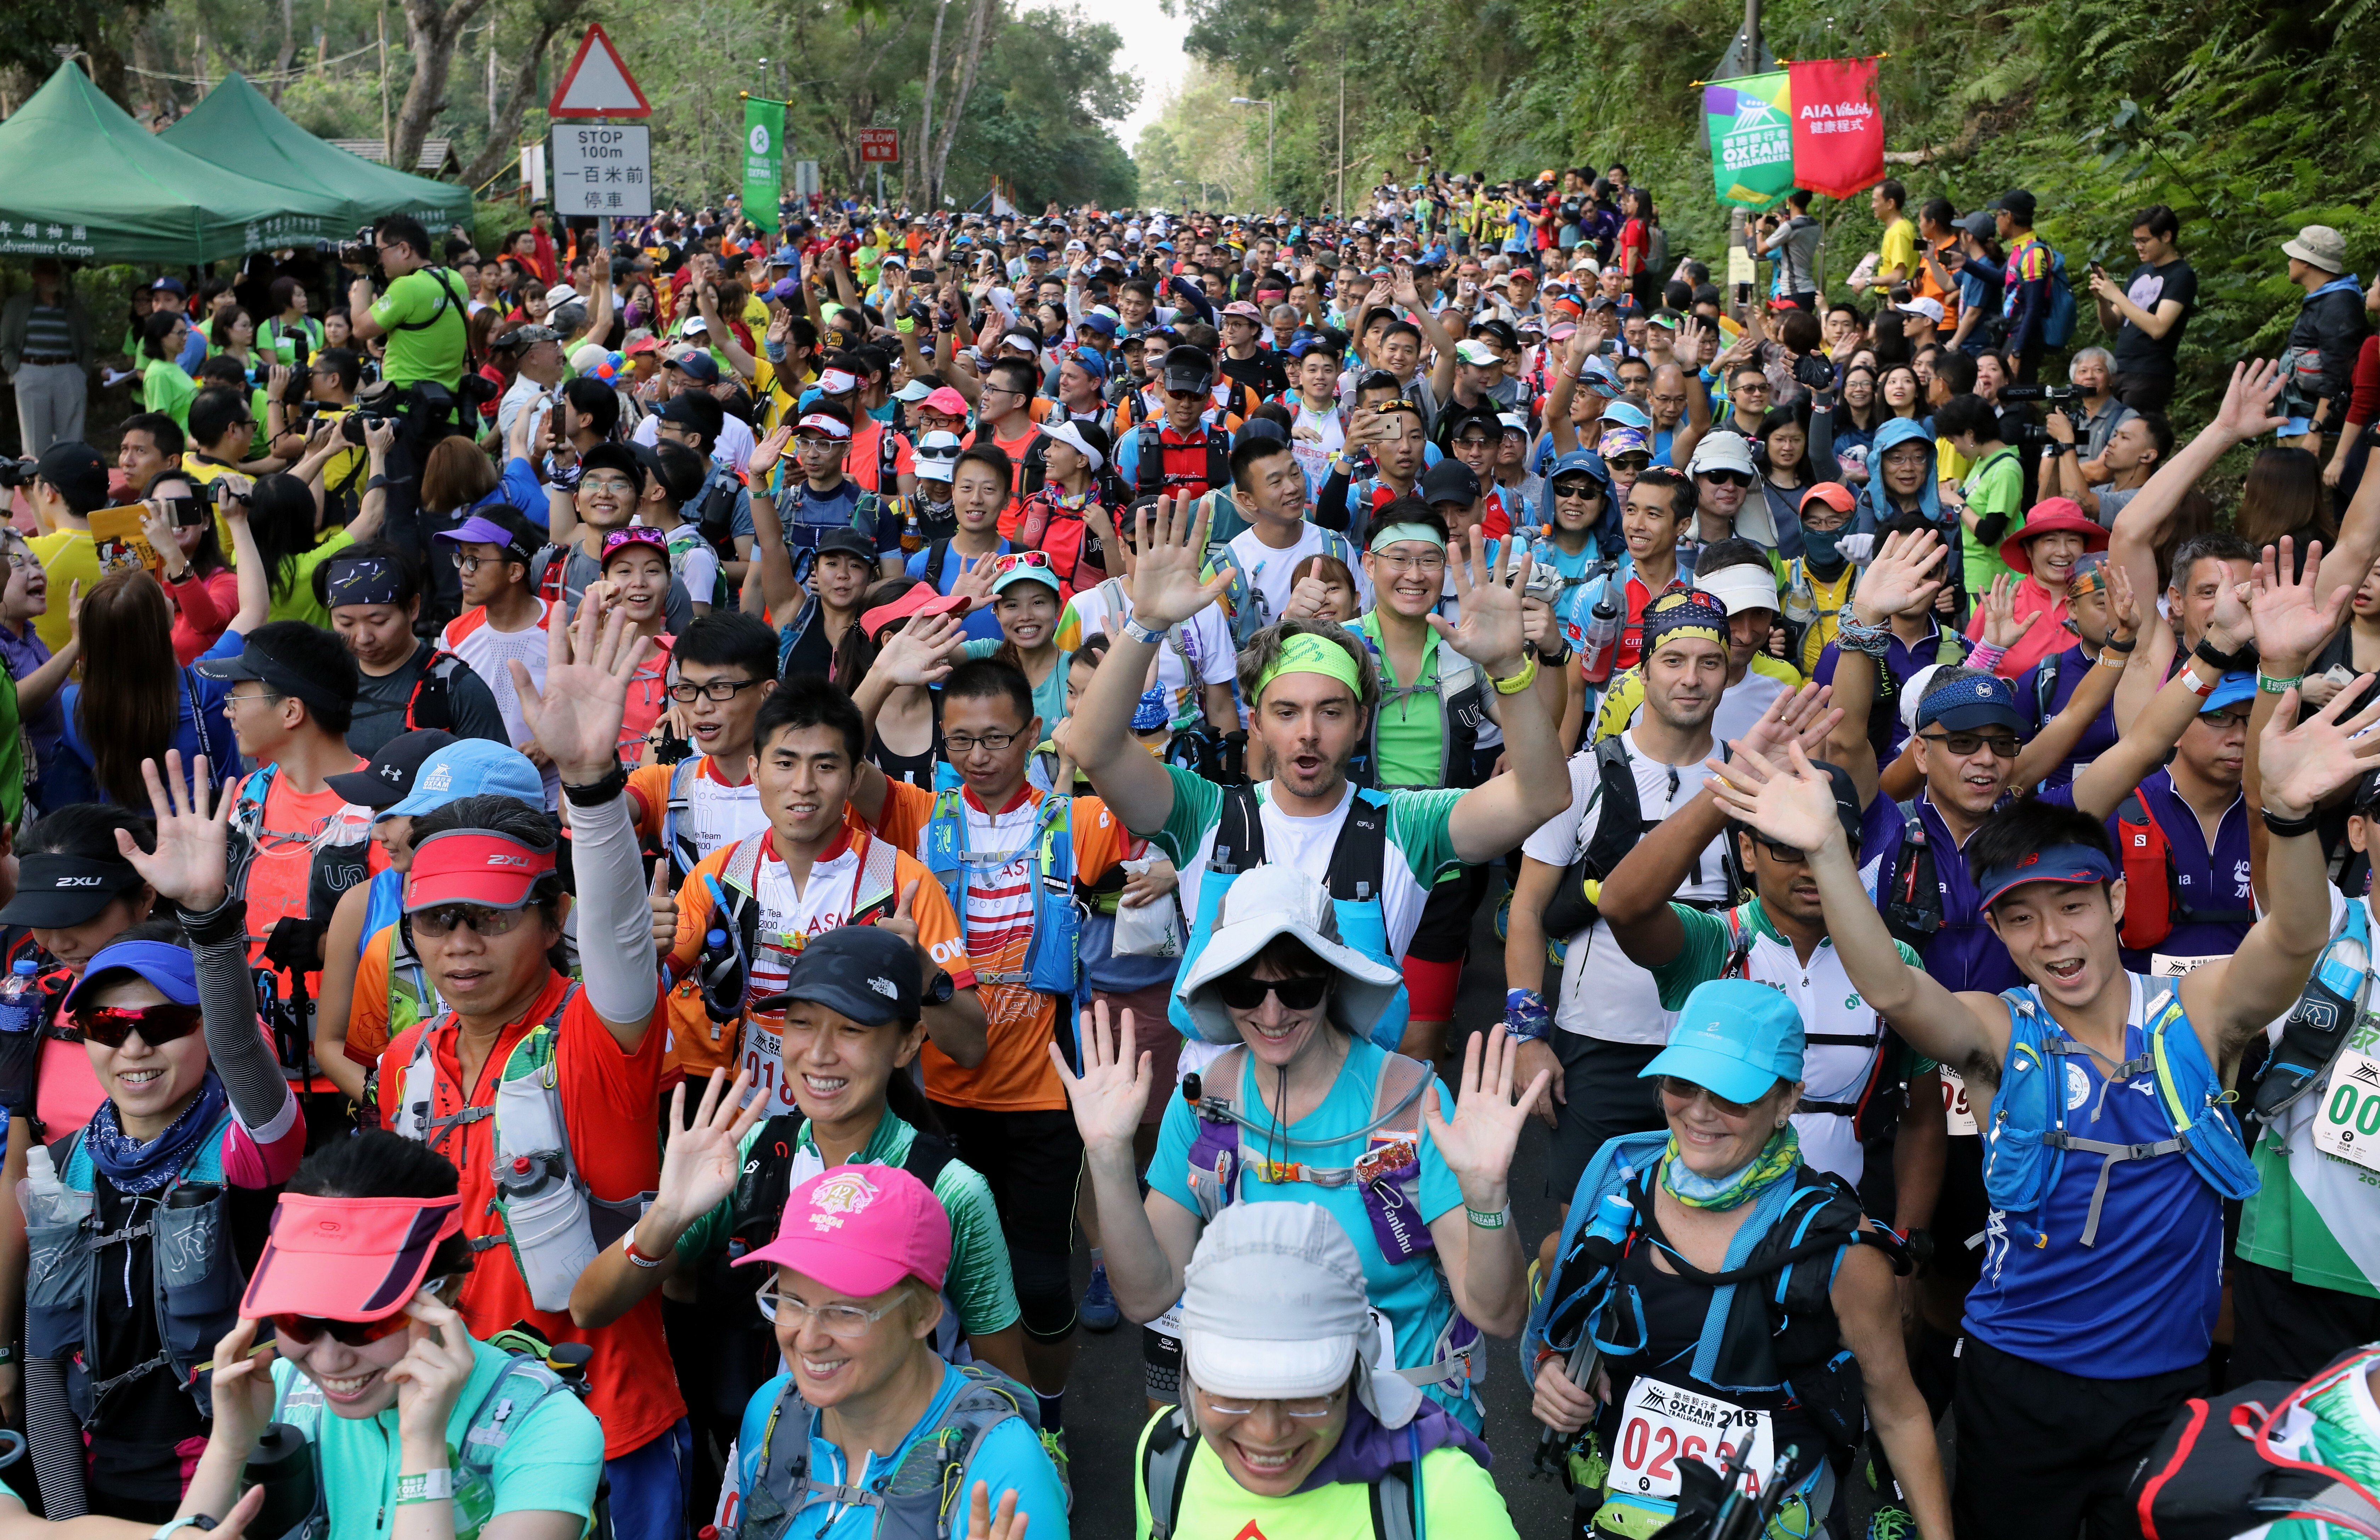 Competitors at the starting point of the 2018 Oxfam Trailwalker in Sai Kung. Photo: Dickson Lee